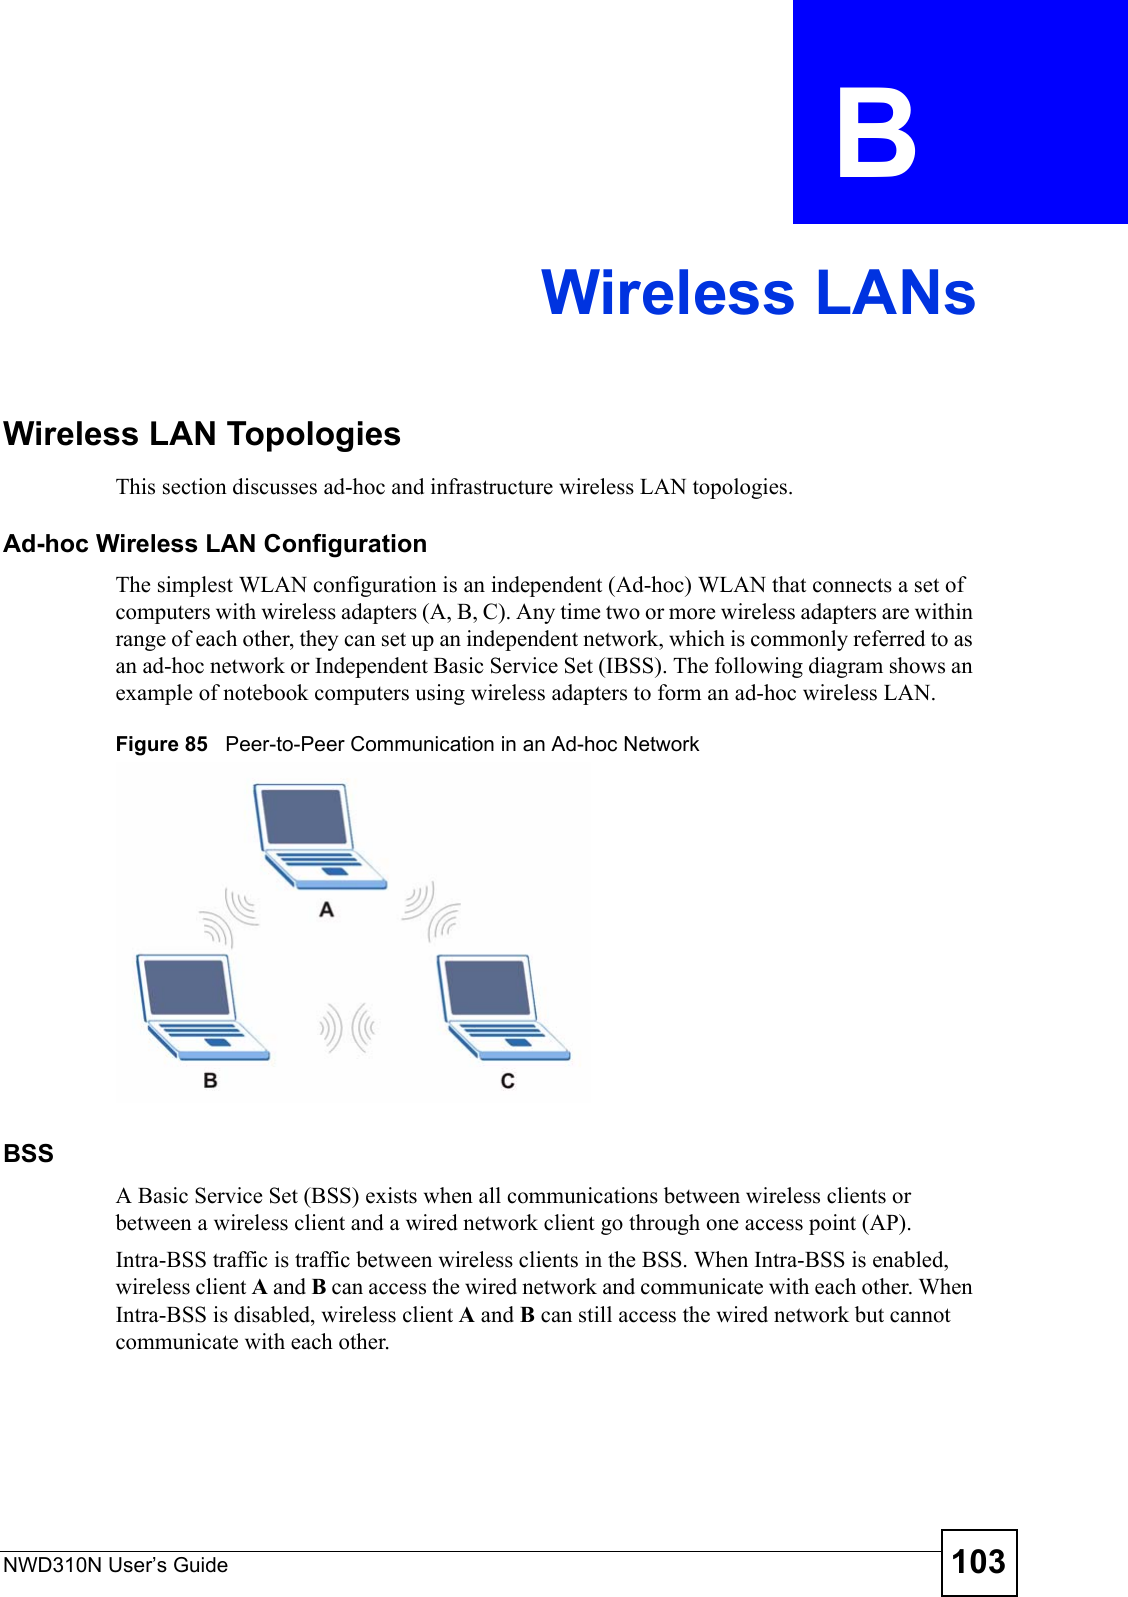 NWD310N User’s Guide 103APPENDIX  B Wireless LANsWireless LAN TopologiesThis section discusses ad-hoc and infrastructure wireless LAN topologies.Ad-hoc Wireless LAN ConfigurationThe simplest WLAN configuration is an independent (Ad-hoc) WLAN that connects a set of computers with wireless adapters (A, B, C). Any time two or more wireless adapters are within range of each other, they can set up an independent network, which is commonly referred to as an ad-hoc network or Independent Basic Service Set (IBSS). The following diagram shows an example of notebook computers using wireless adapters to form an ad-hoc wireless LAN. Figure 85   Peer-to-Peer Communication in an Ad-hoc NetworkBSSA Basic Service Set (BSS) exists when all communications between wireless clients or between a wireless client and a wired network client go through one access point (AP). Intra-BSS traffic is traffic between wireless clients in the BSS. When Intra-BSS is enabled, wireless client A and B can access the wired network and communicate with each other. When Intra-BSS is disabled, wireless client A and B can still access the wired network but cannot communicate with each other.